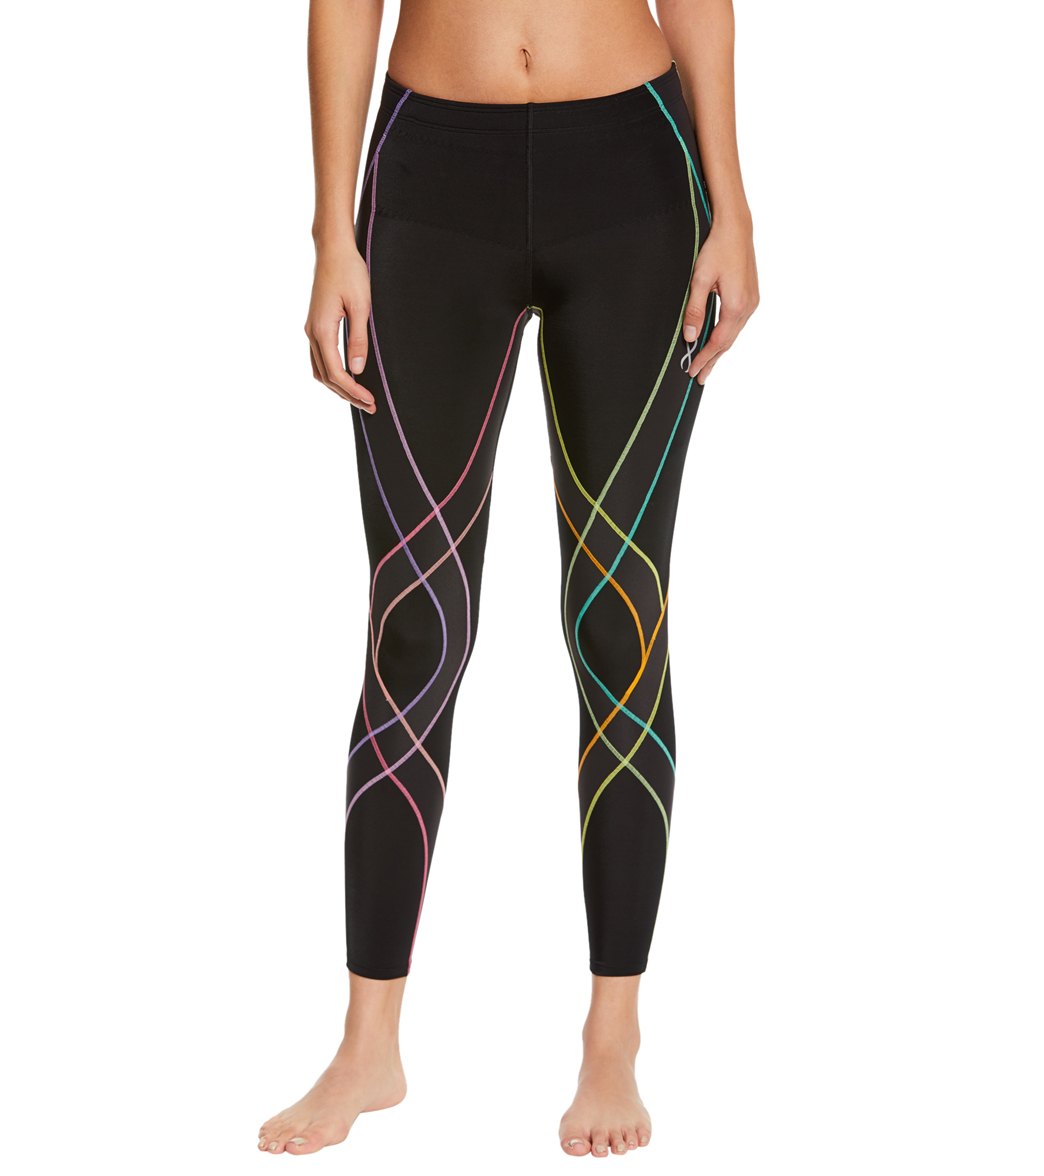 CW-X Running Tights at SwimOutlet.com